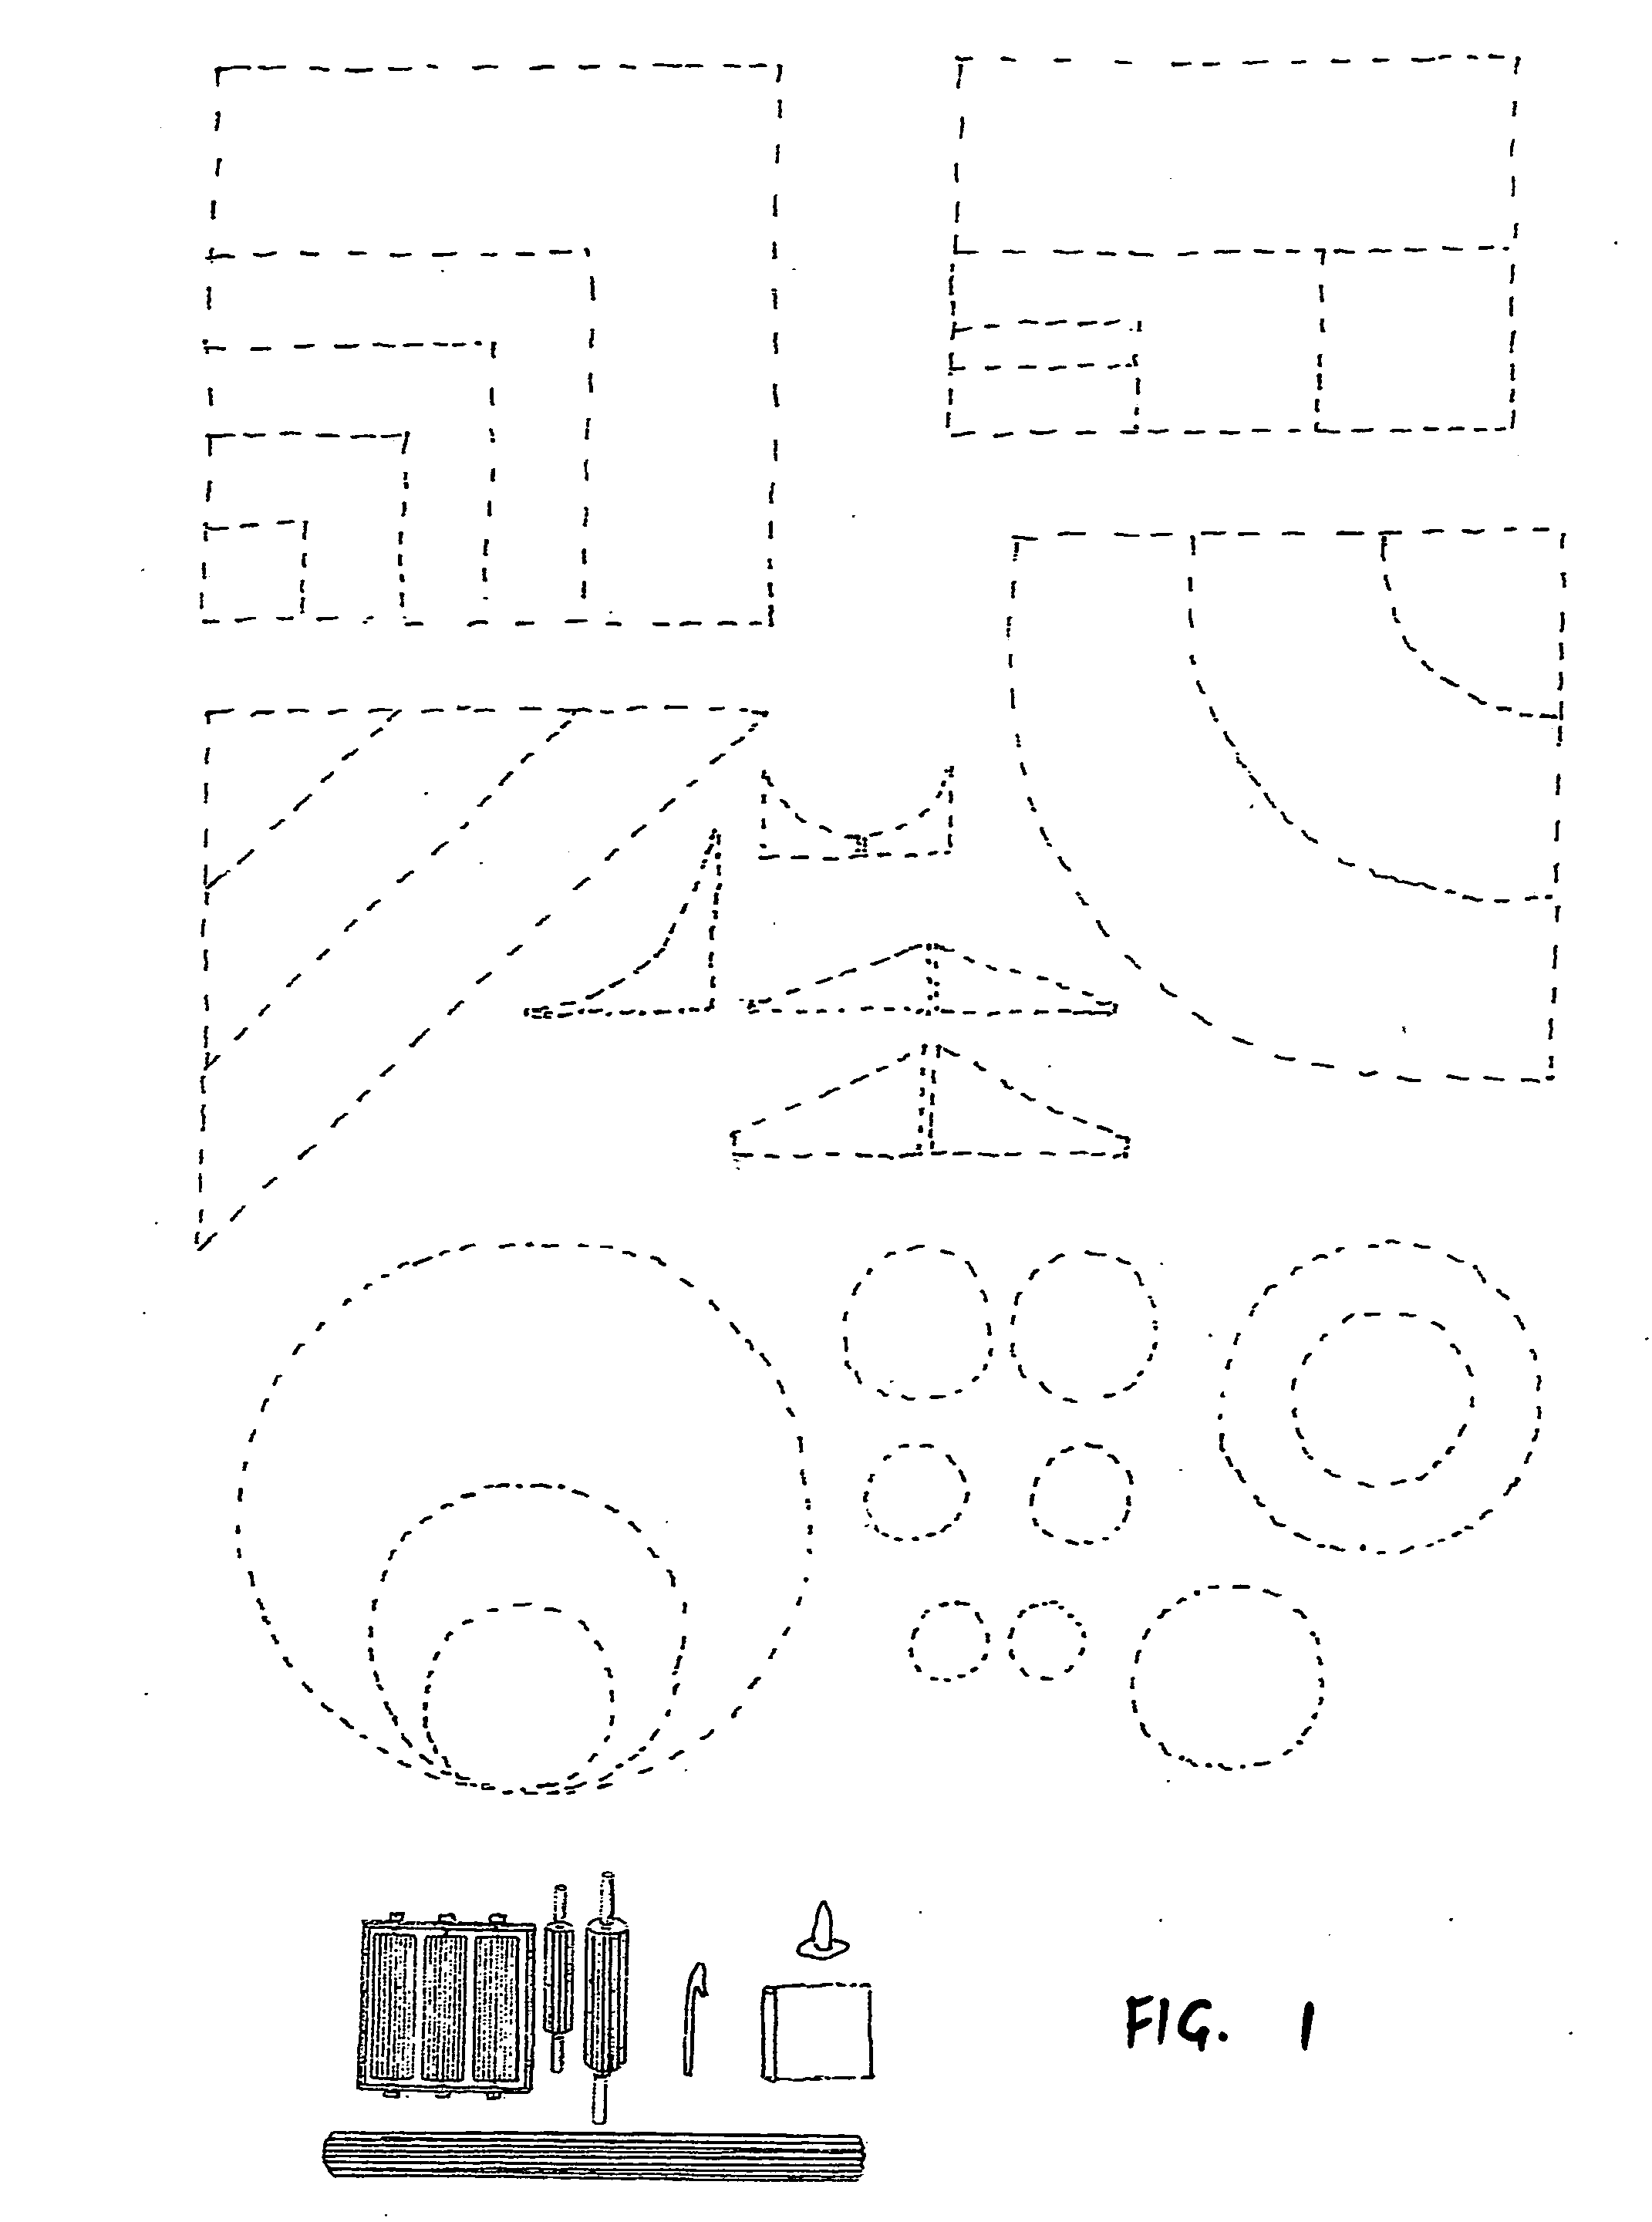 Felting loom system and method for producing felted woven fibre art textile shapes